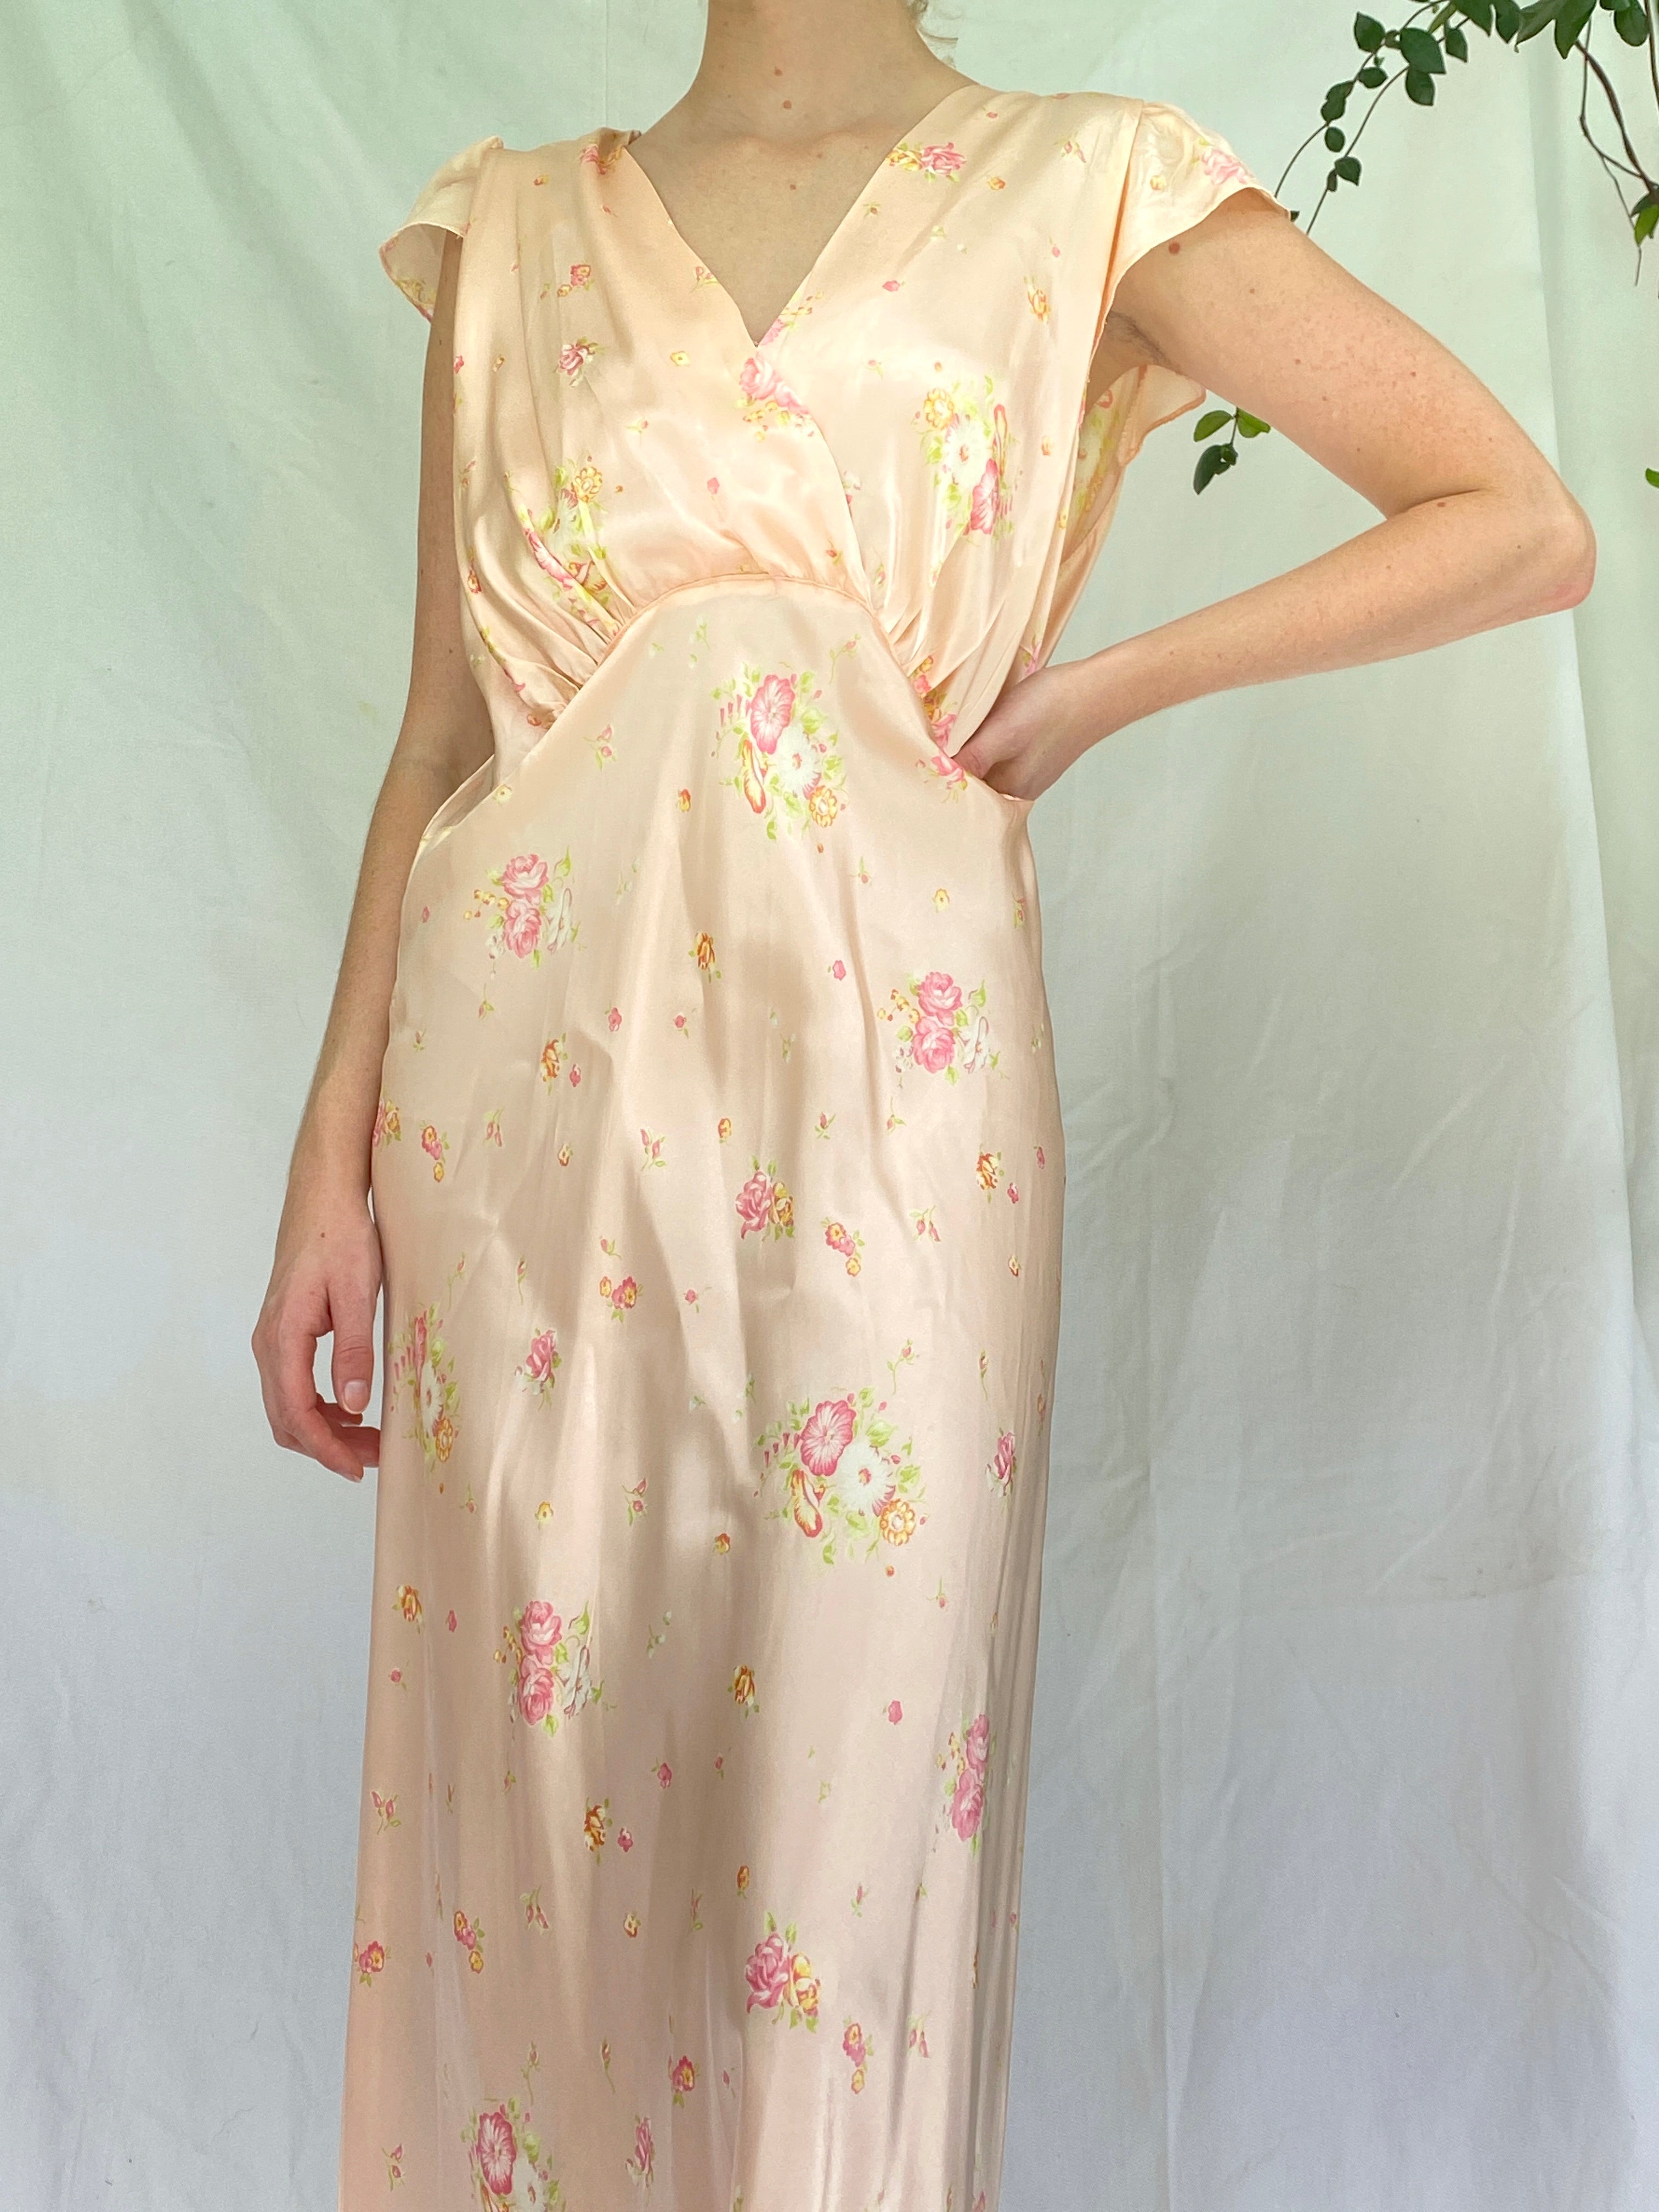 Silky Pink Slip with Yellow and Pink Floral Print